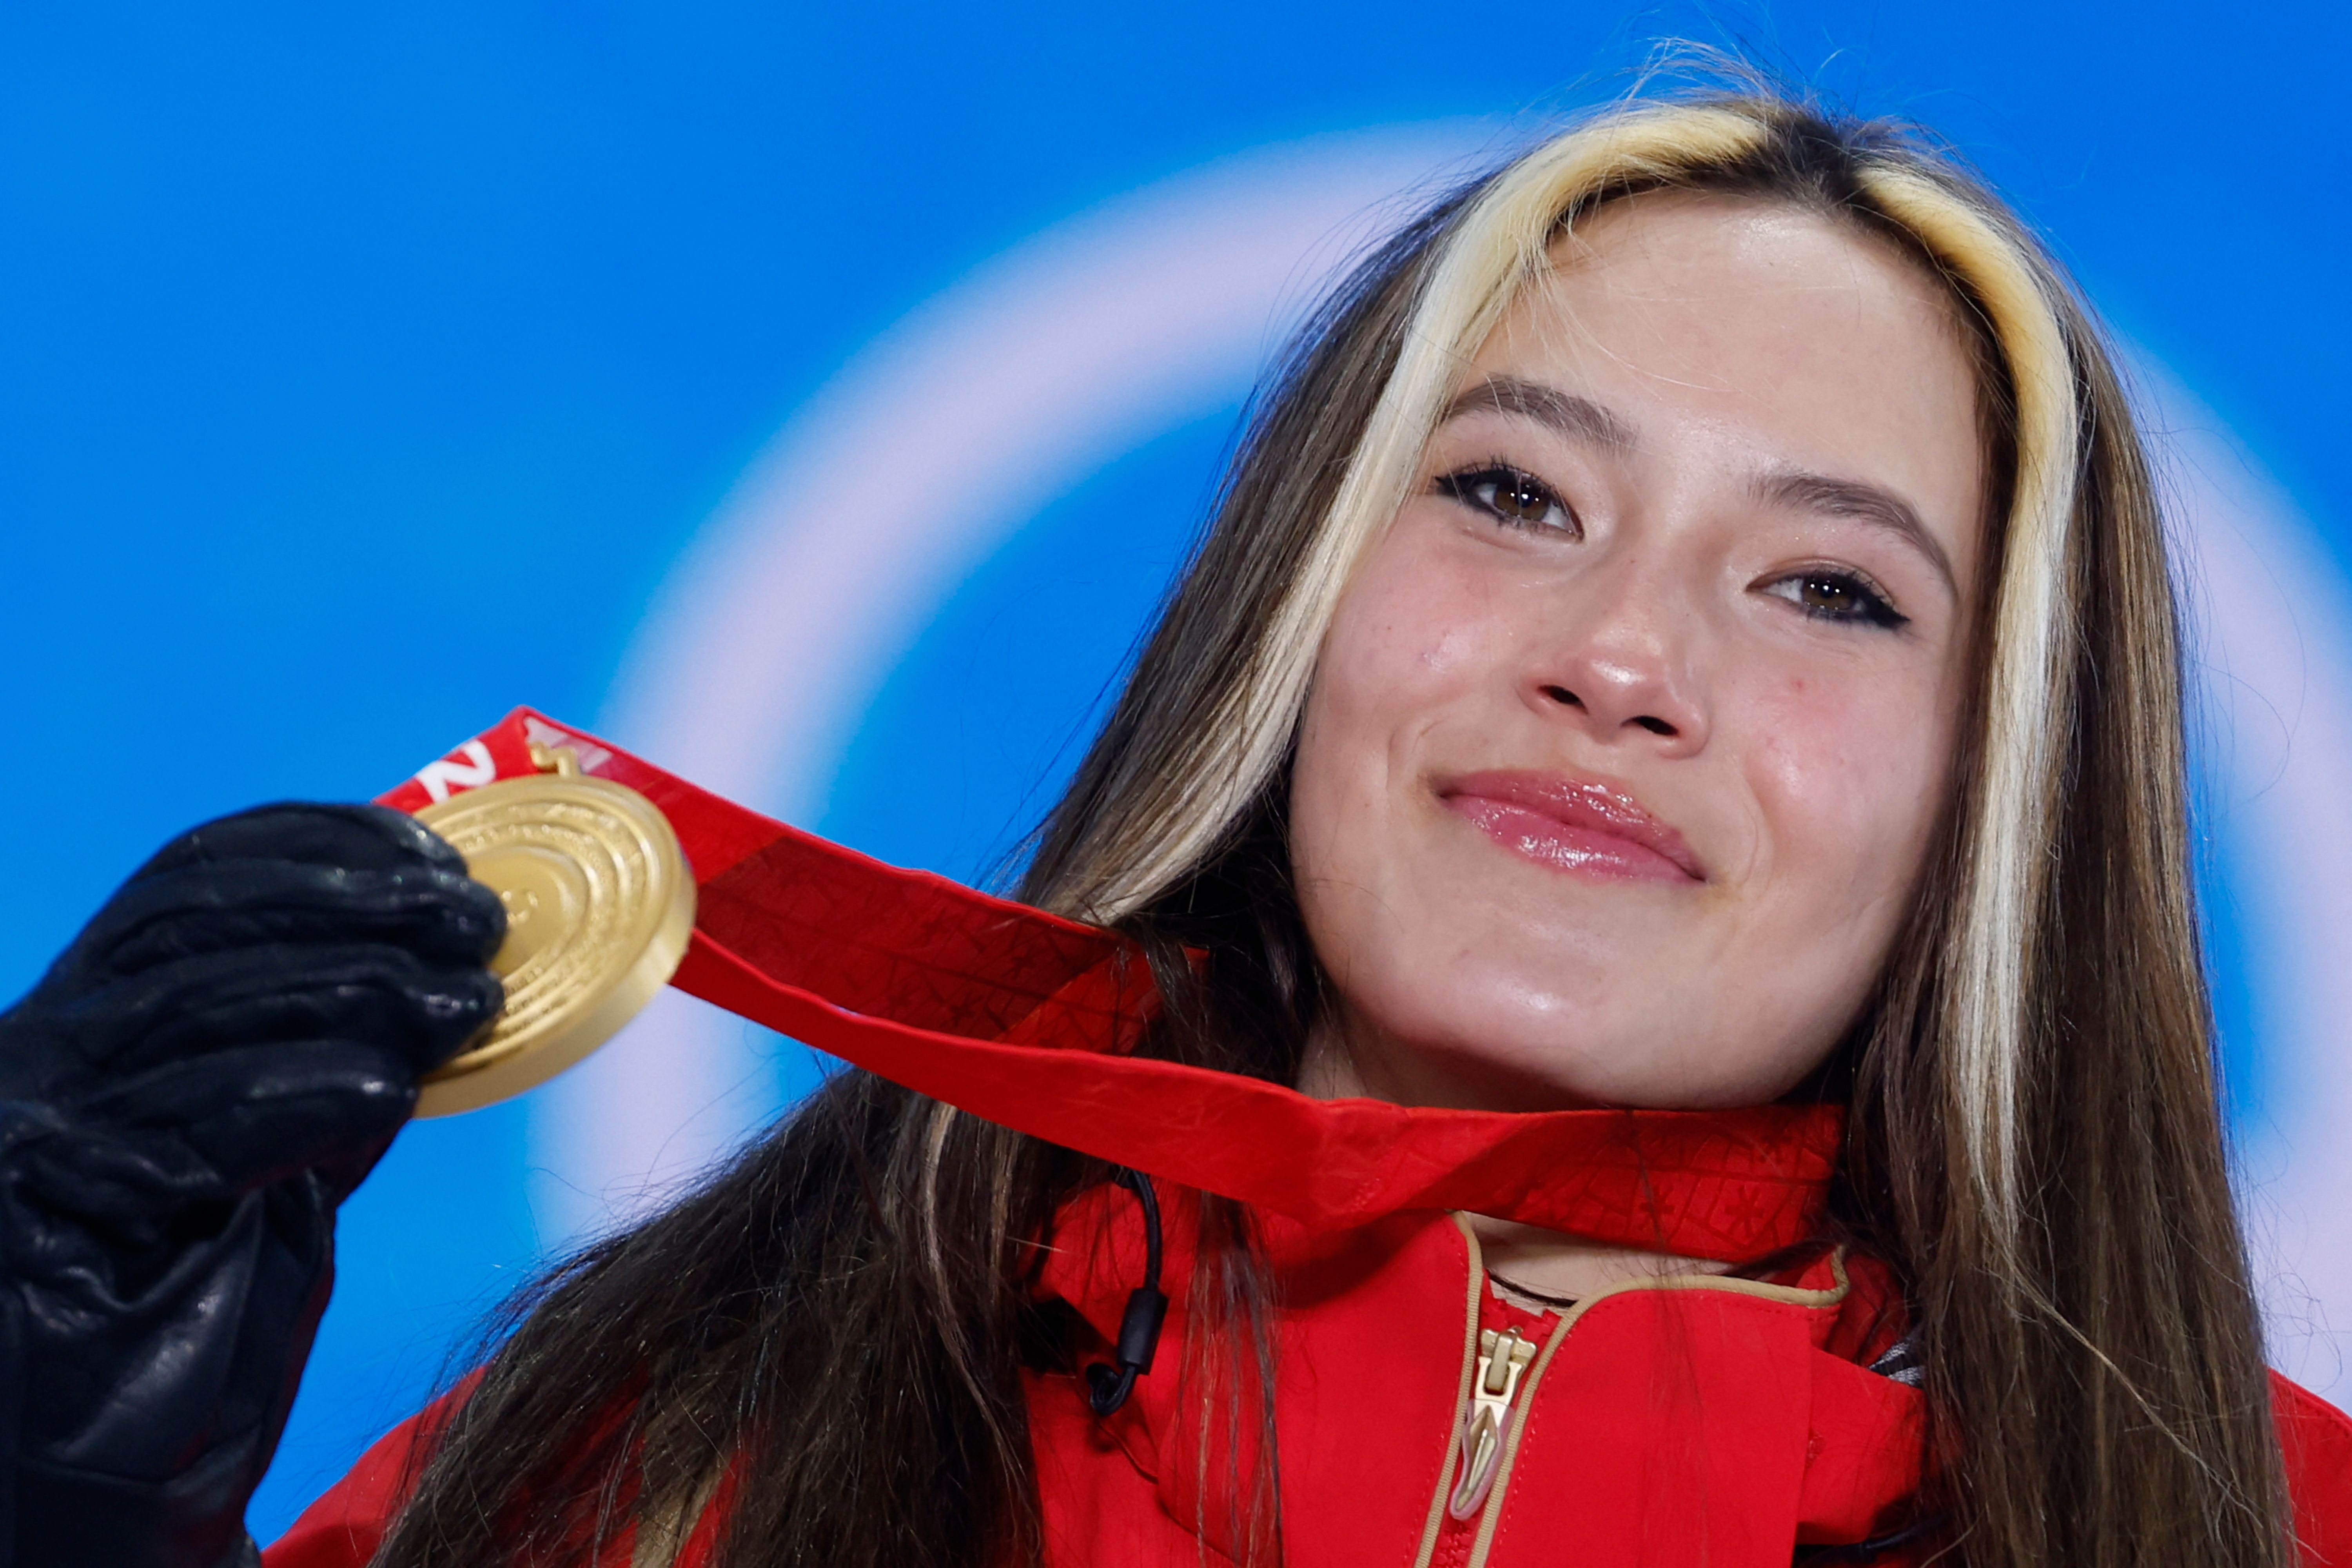 Eileen Gu, who won gold for China, will be ambassador for U.S.